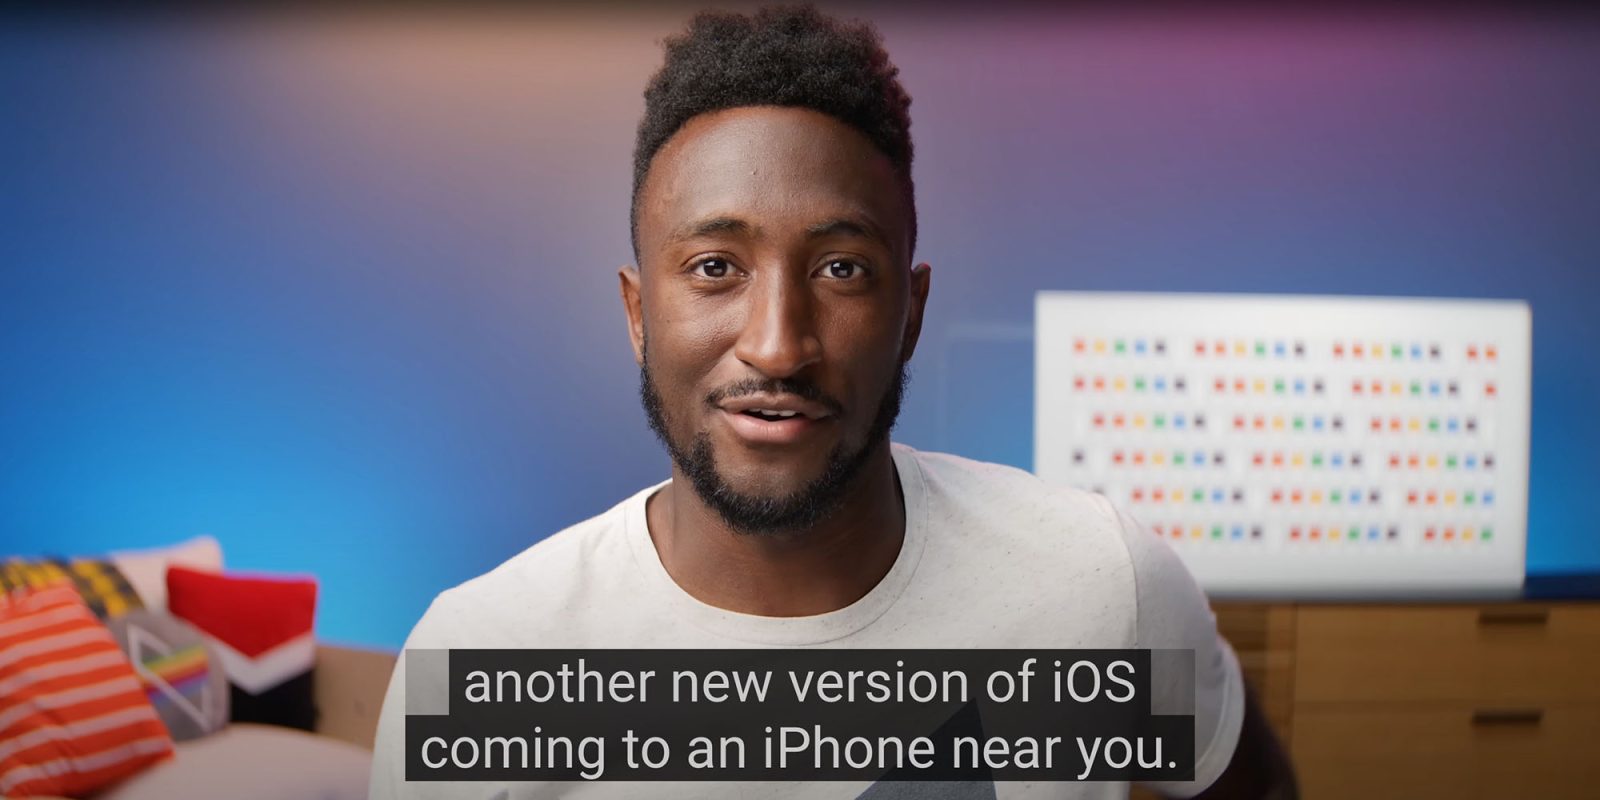 Apple used YouTube videos to train AI without consent | Screengrab from an MKVHD video with subtitles shown